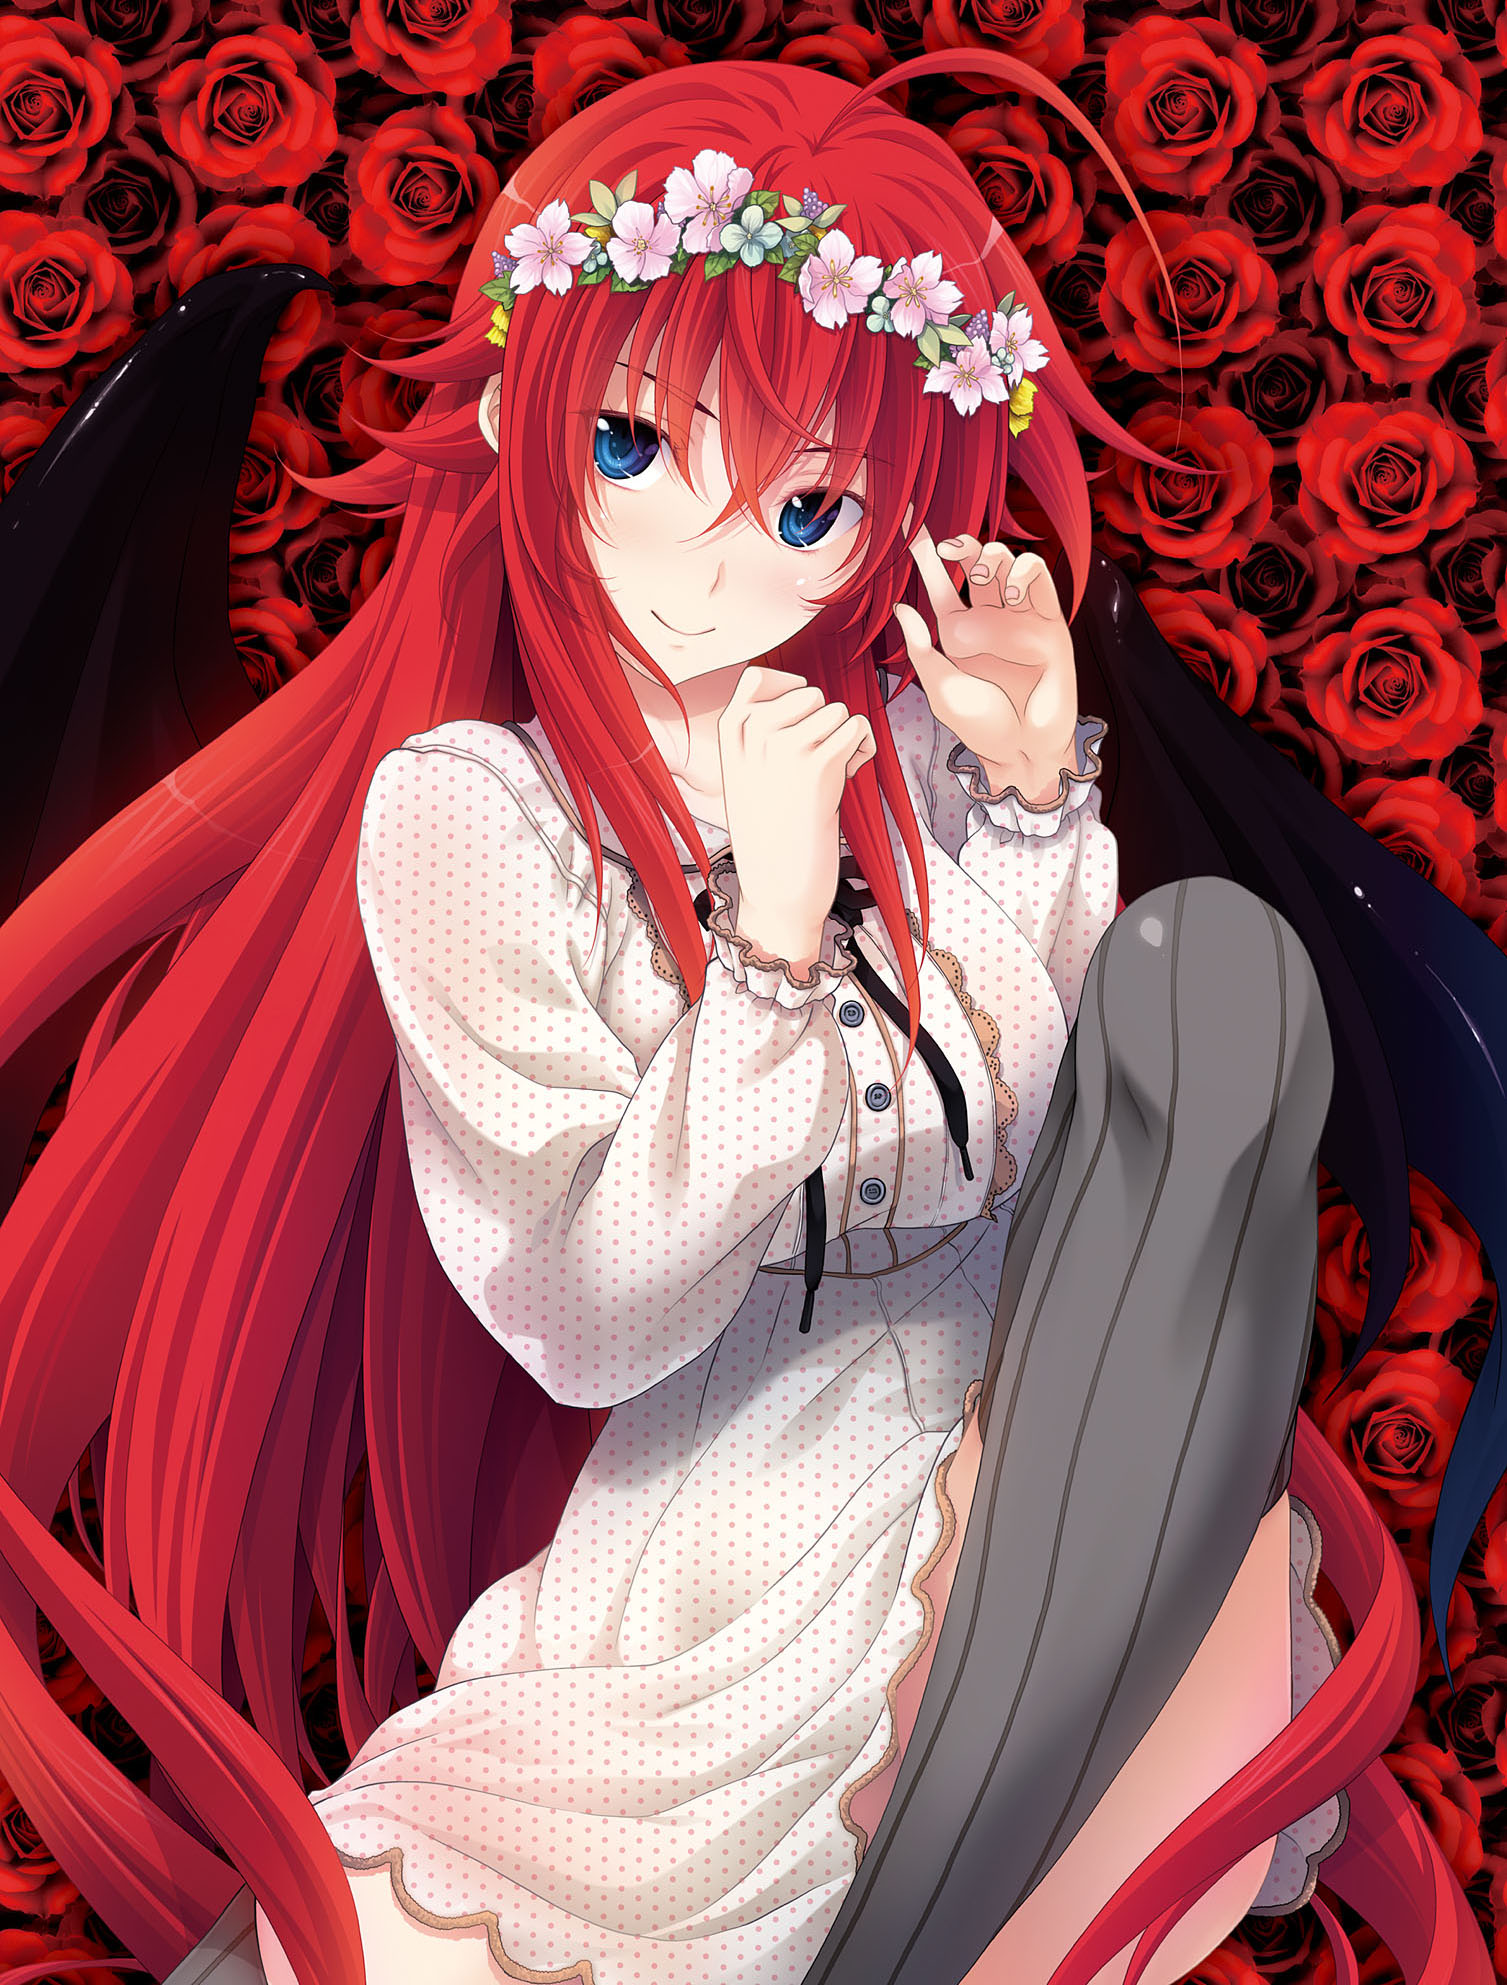 Rias Gremory: Crimson Fury - Chapter 1 - Dragonheart Of Ireland  (RepublicChe) - Highschool DxD (Anime) [Archive of Our Own]